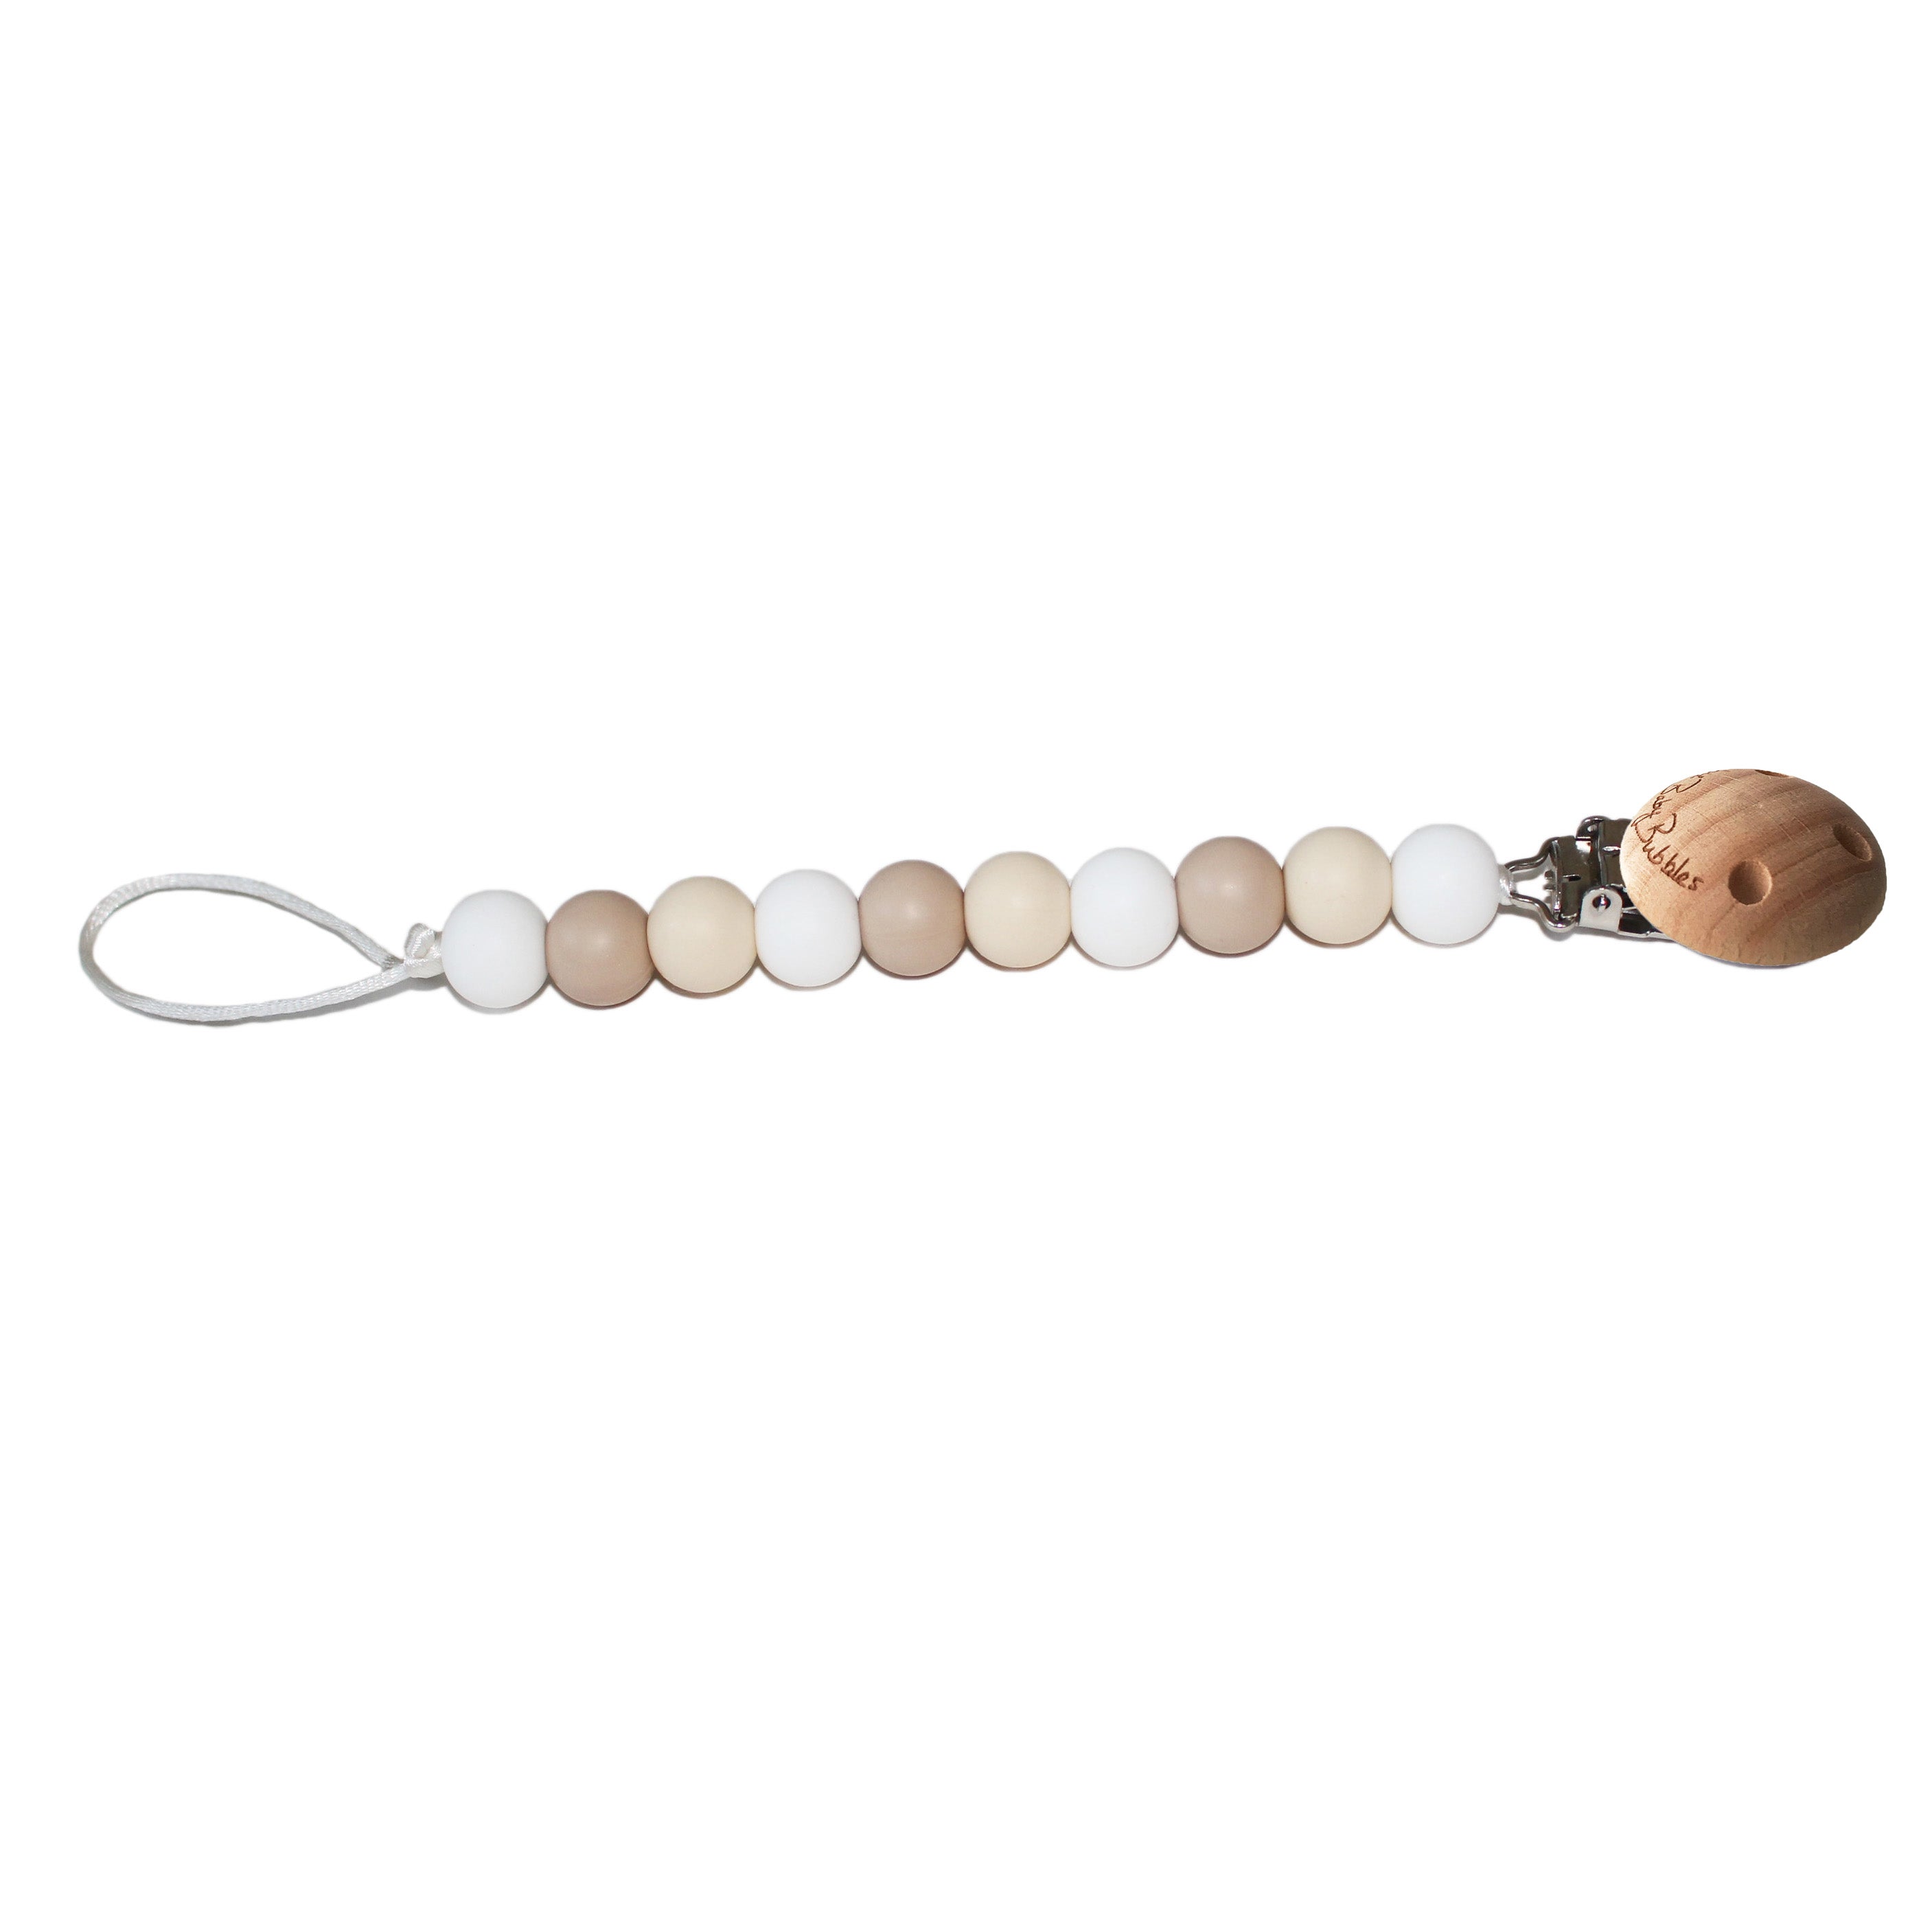 Toasted Marshmallows Pacifier Clip